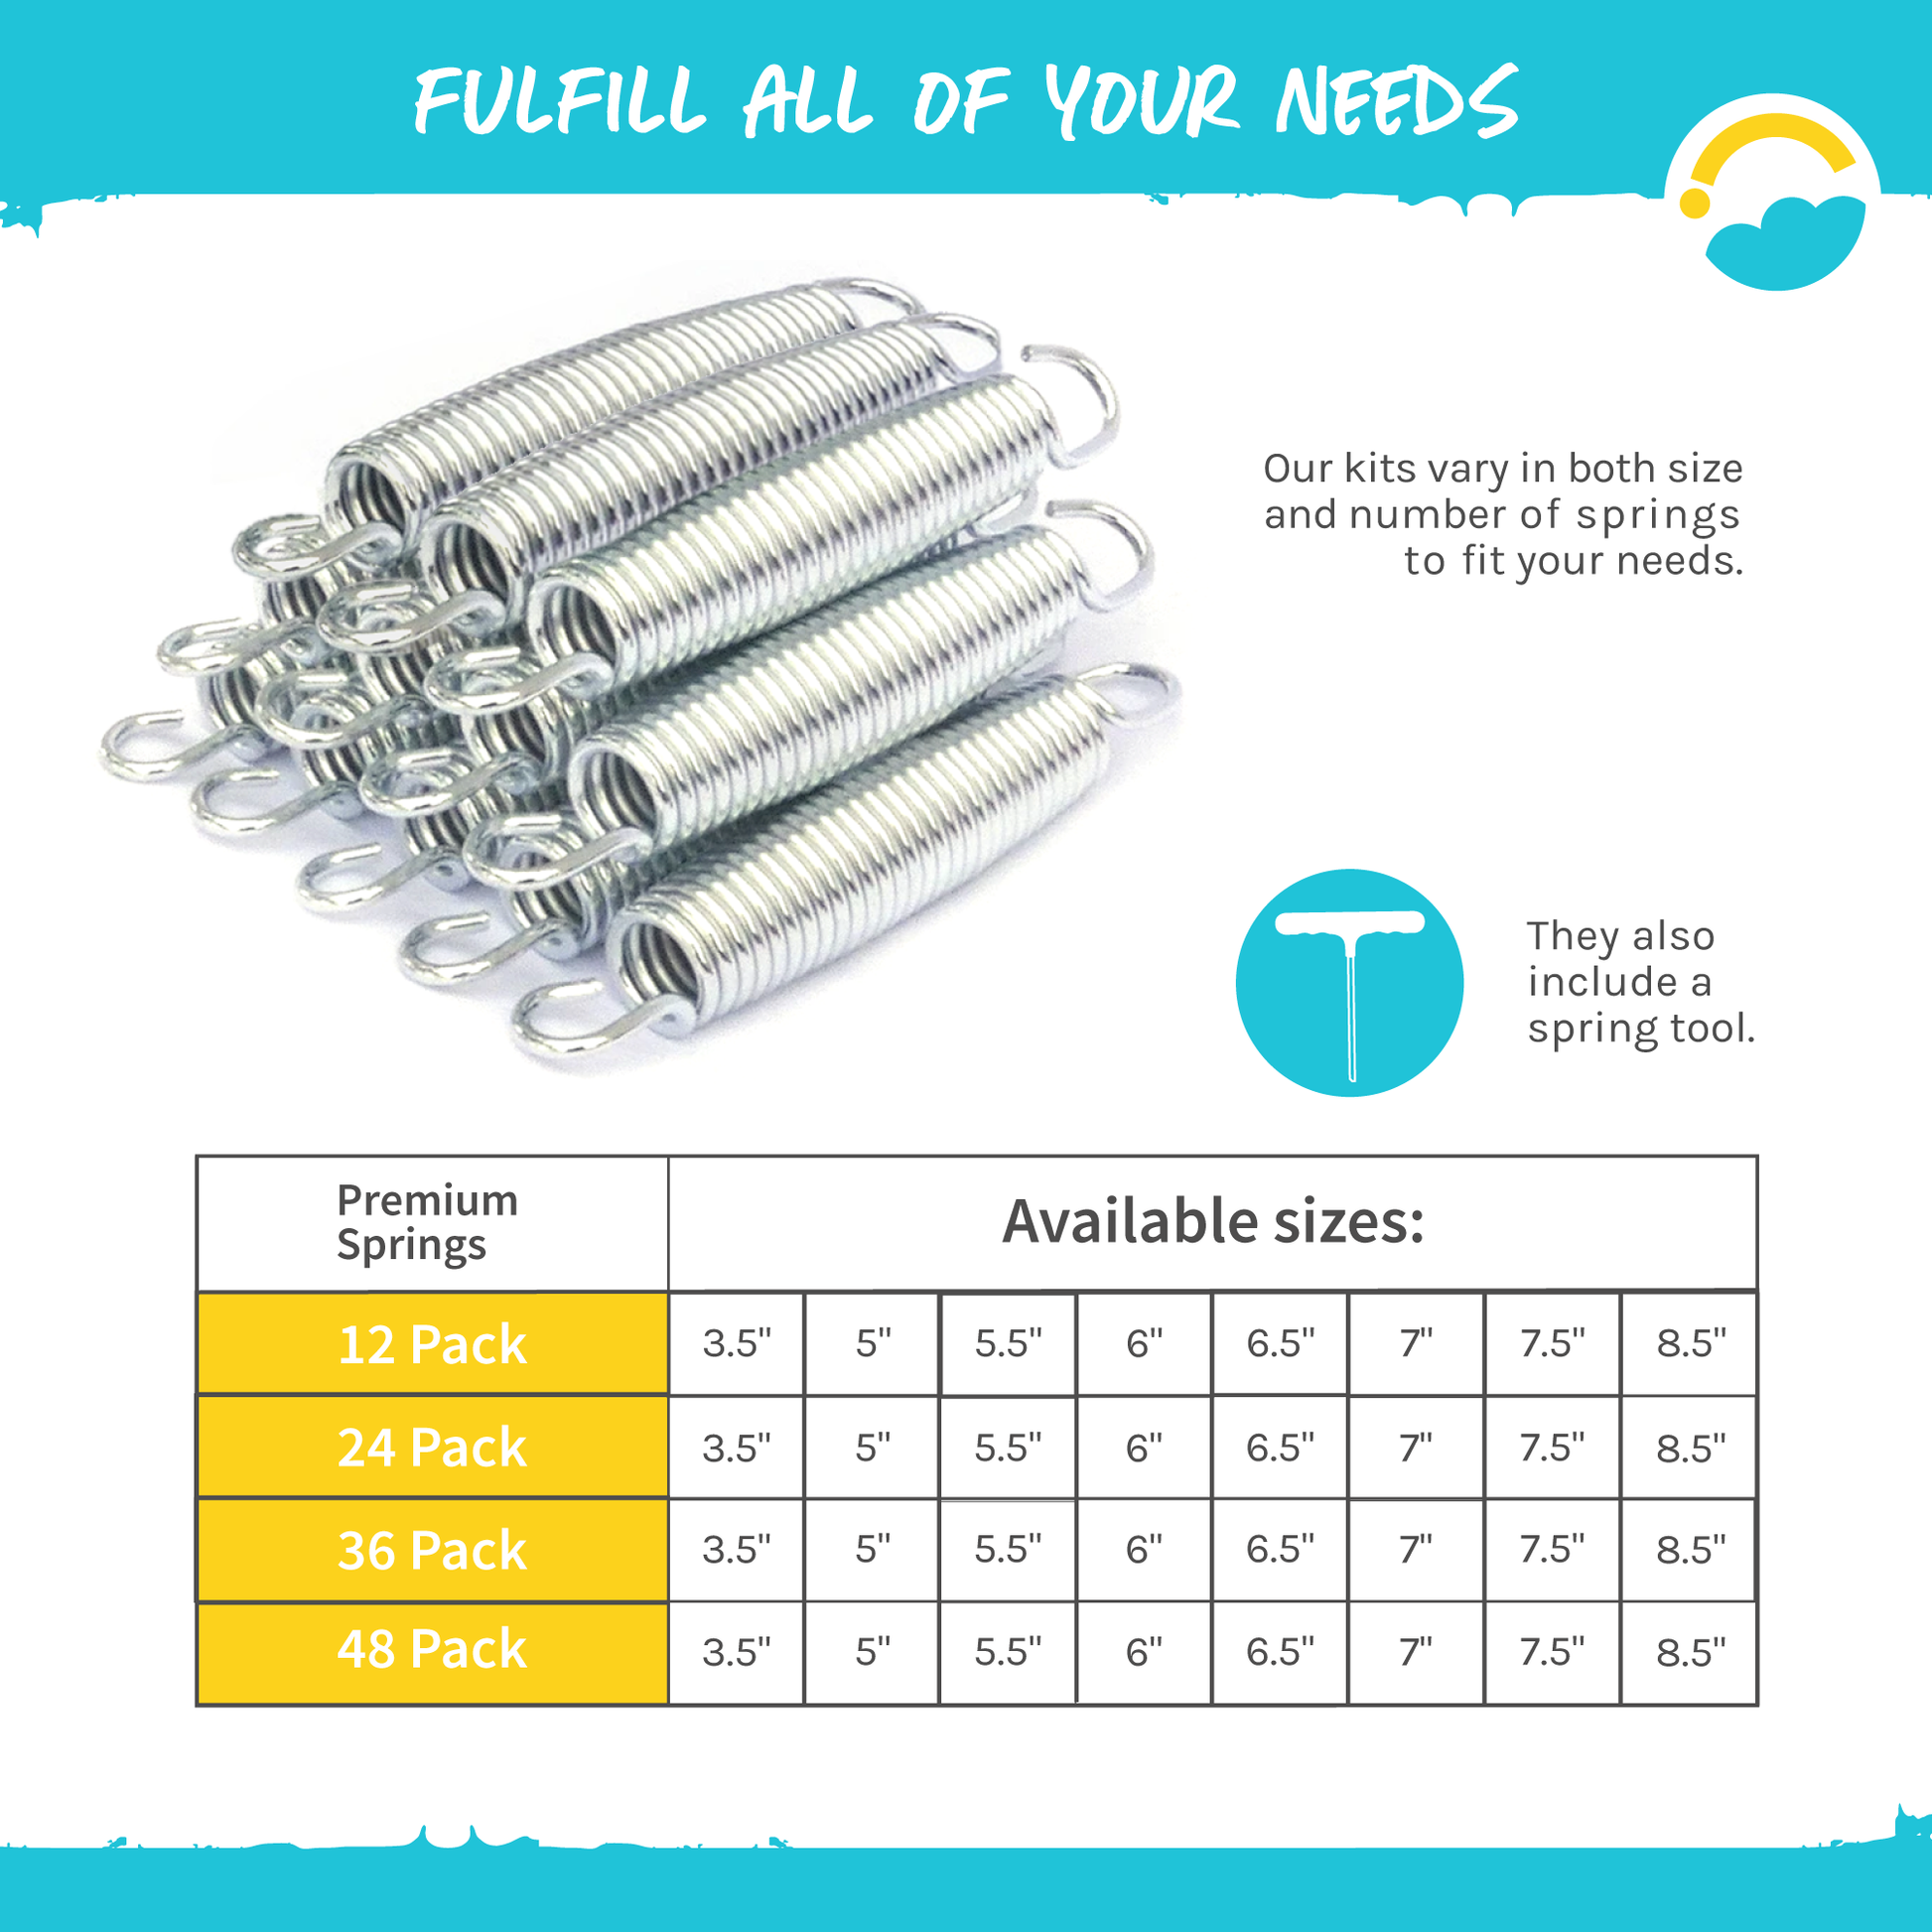 Fulfill all of your needs: Our kits vary in both size and number of springs to fit your needs. Product contains a spring tool. Spring packs come in 12 pack, 24 pack, 36 pack, and 48 pack. All packs contain available sizes of 3.5", 5", 5.5", 6", 6.5", 7", 7.5", 8.5" and 7.59" (7.59" has extra-thick version of the 7.5 inch size.)